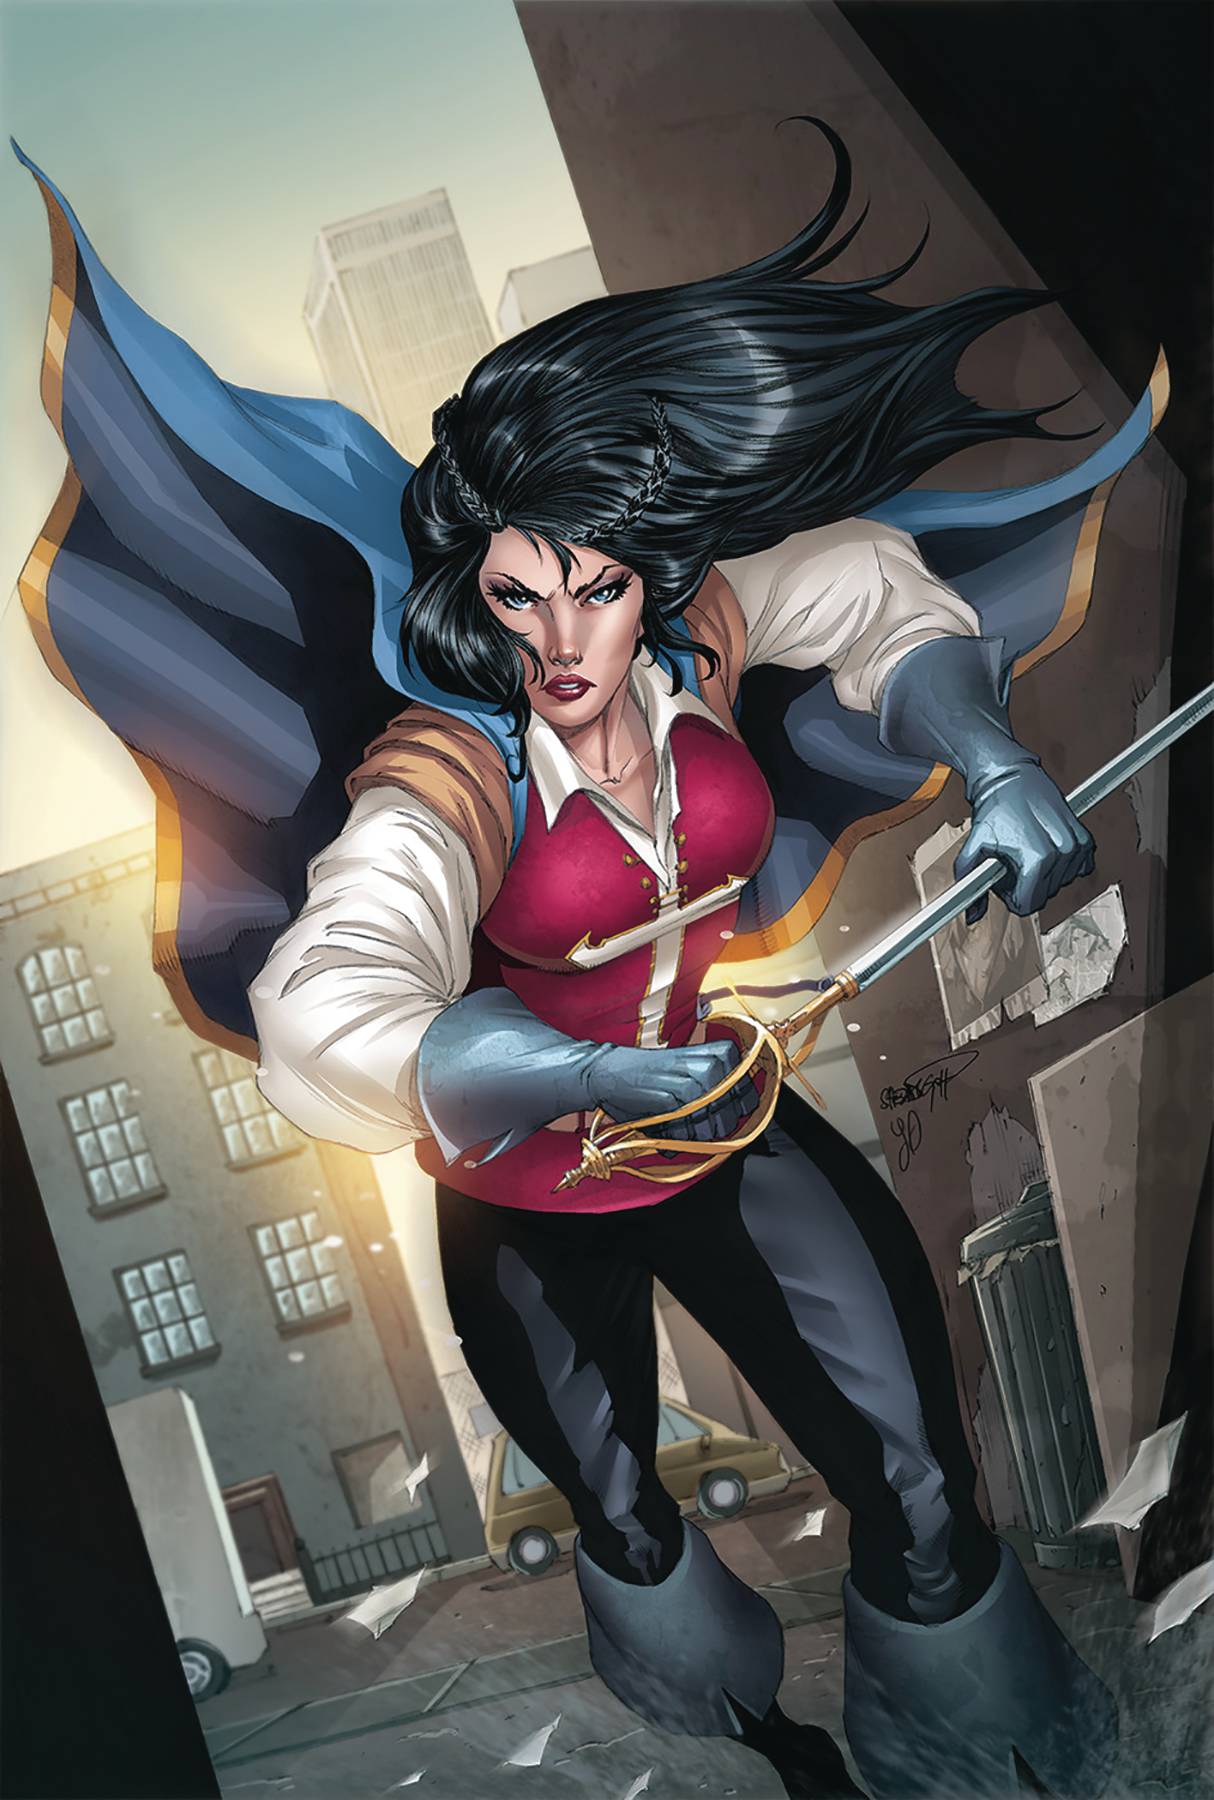 Grimm Fairy Tales #14 Cover A Goh